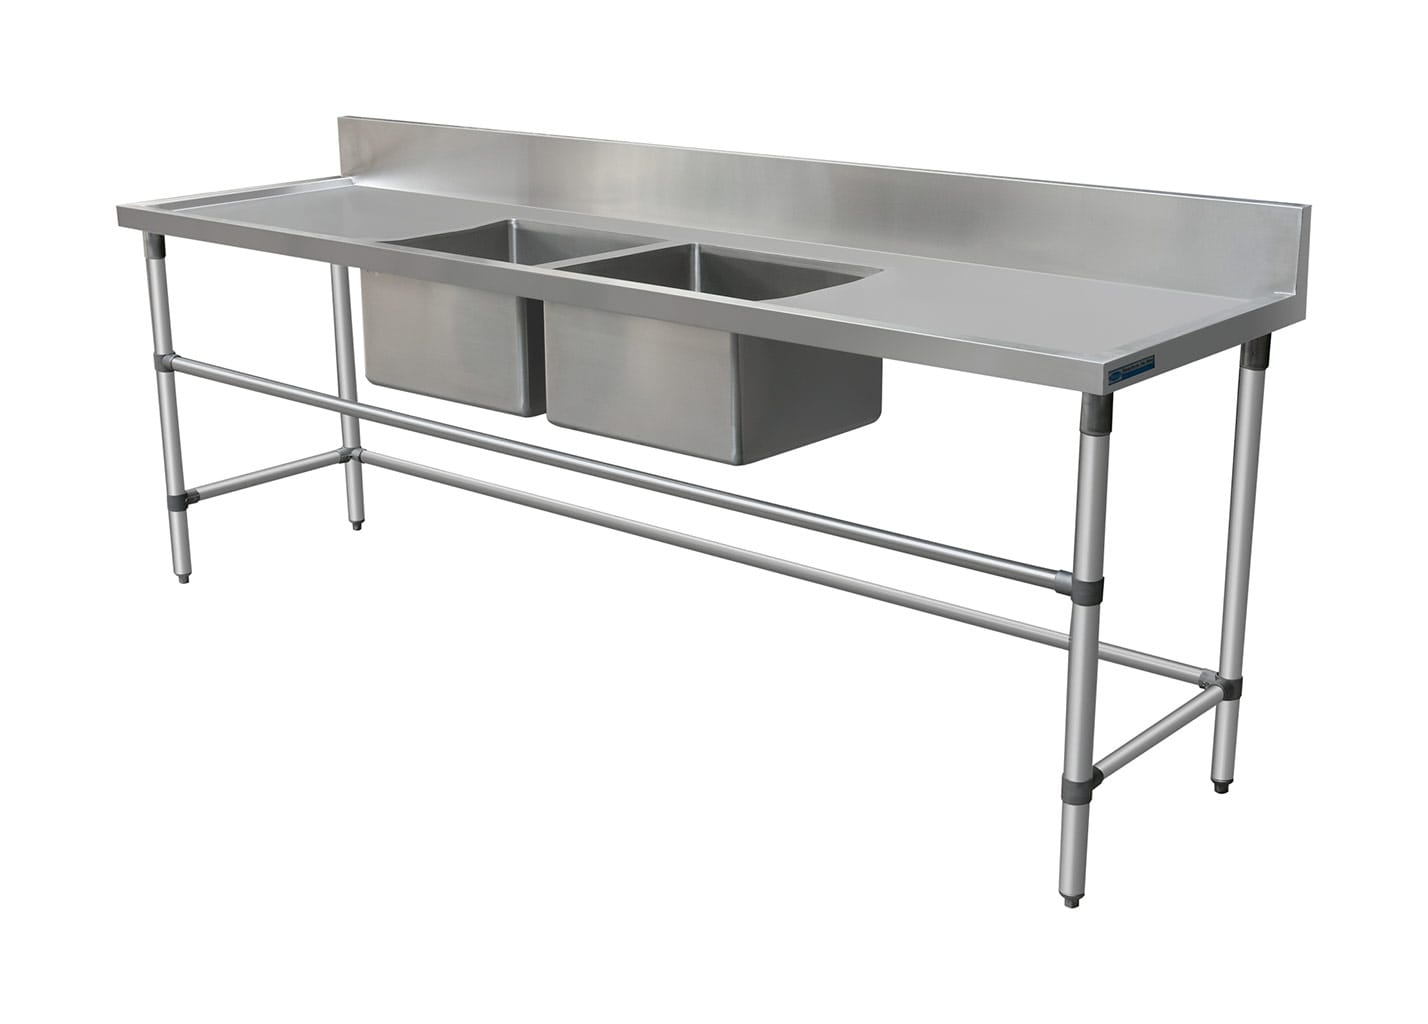 Double Stainless Sink - Right And Left Bench, 2590 x 700 x 900mm high.